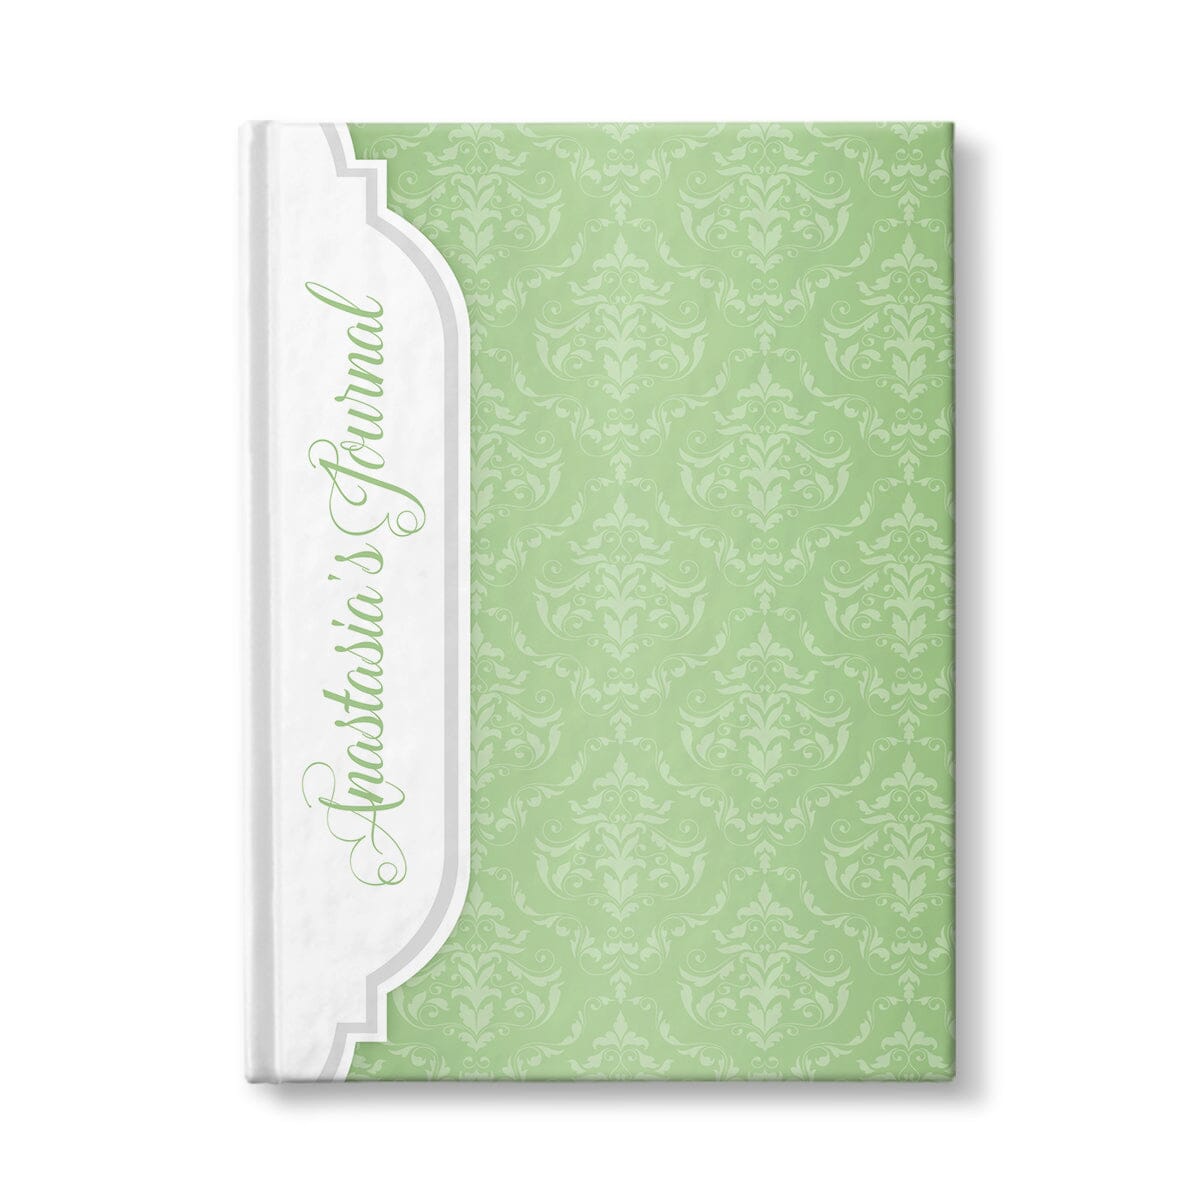 Personalized Green Damask Journal at Artistically Invited.